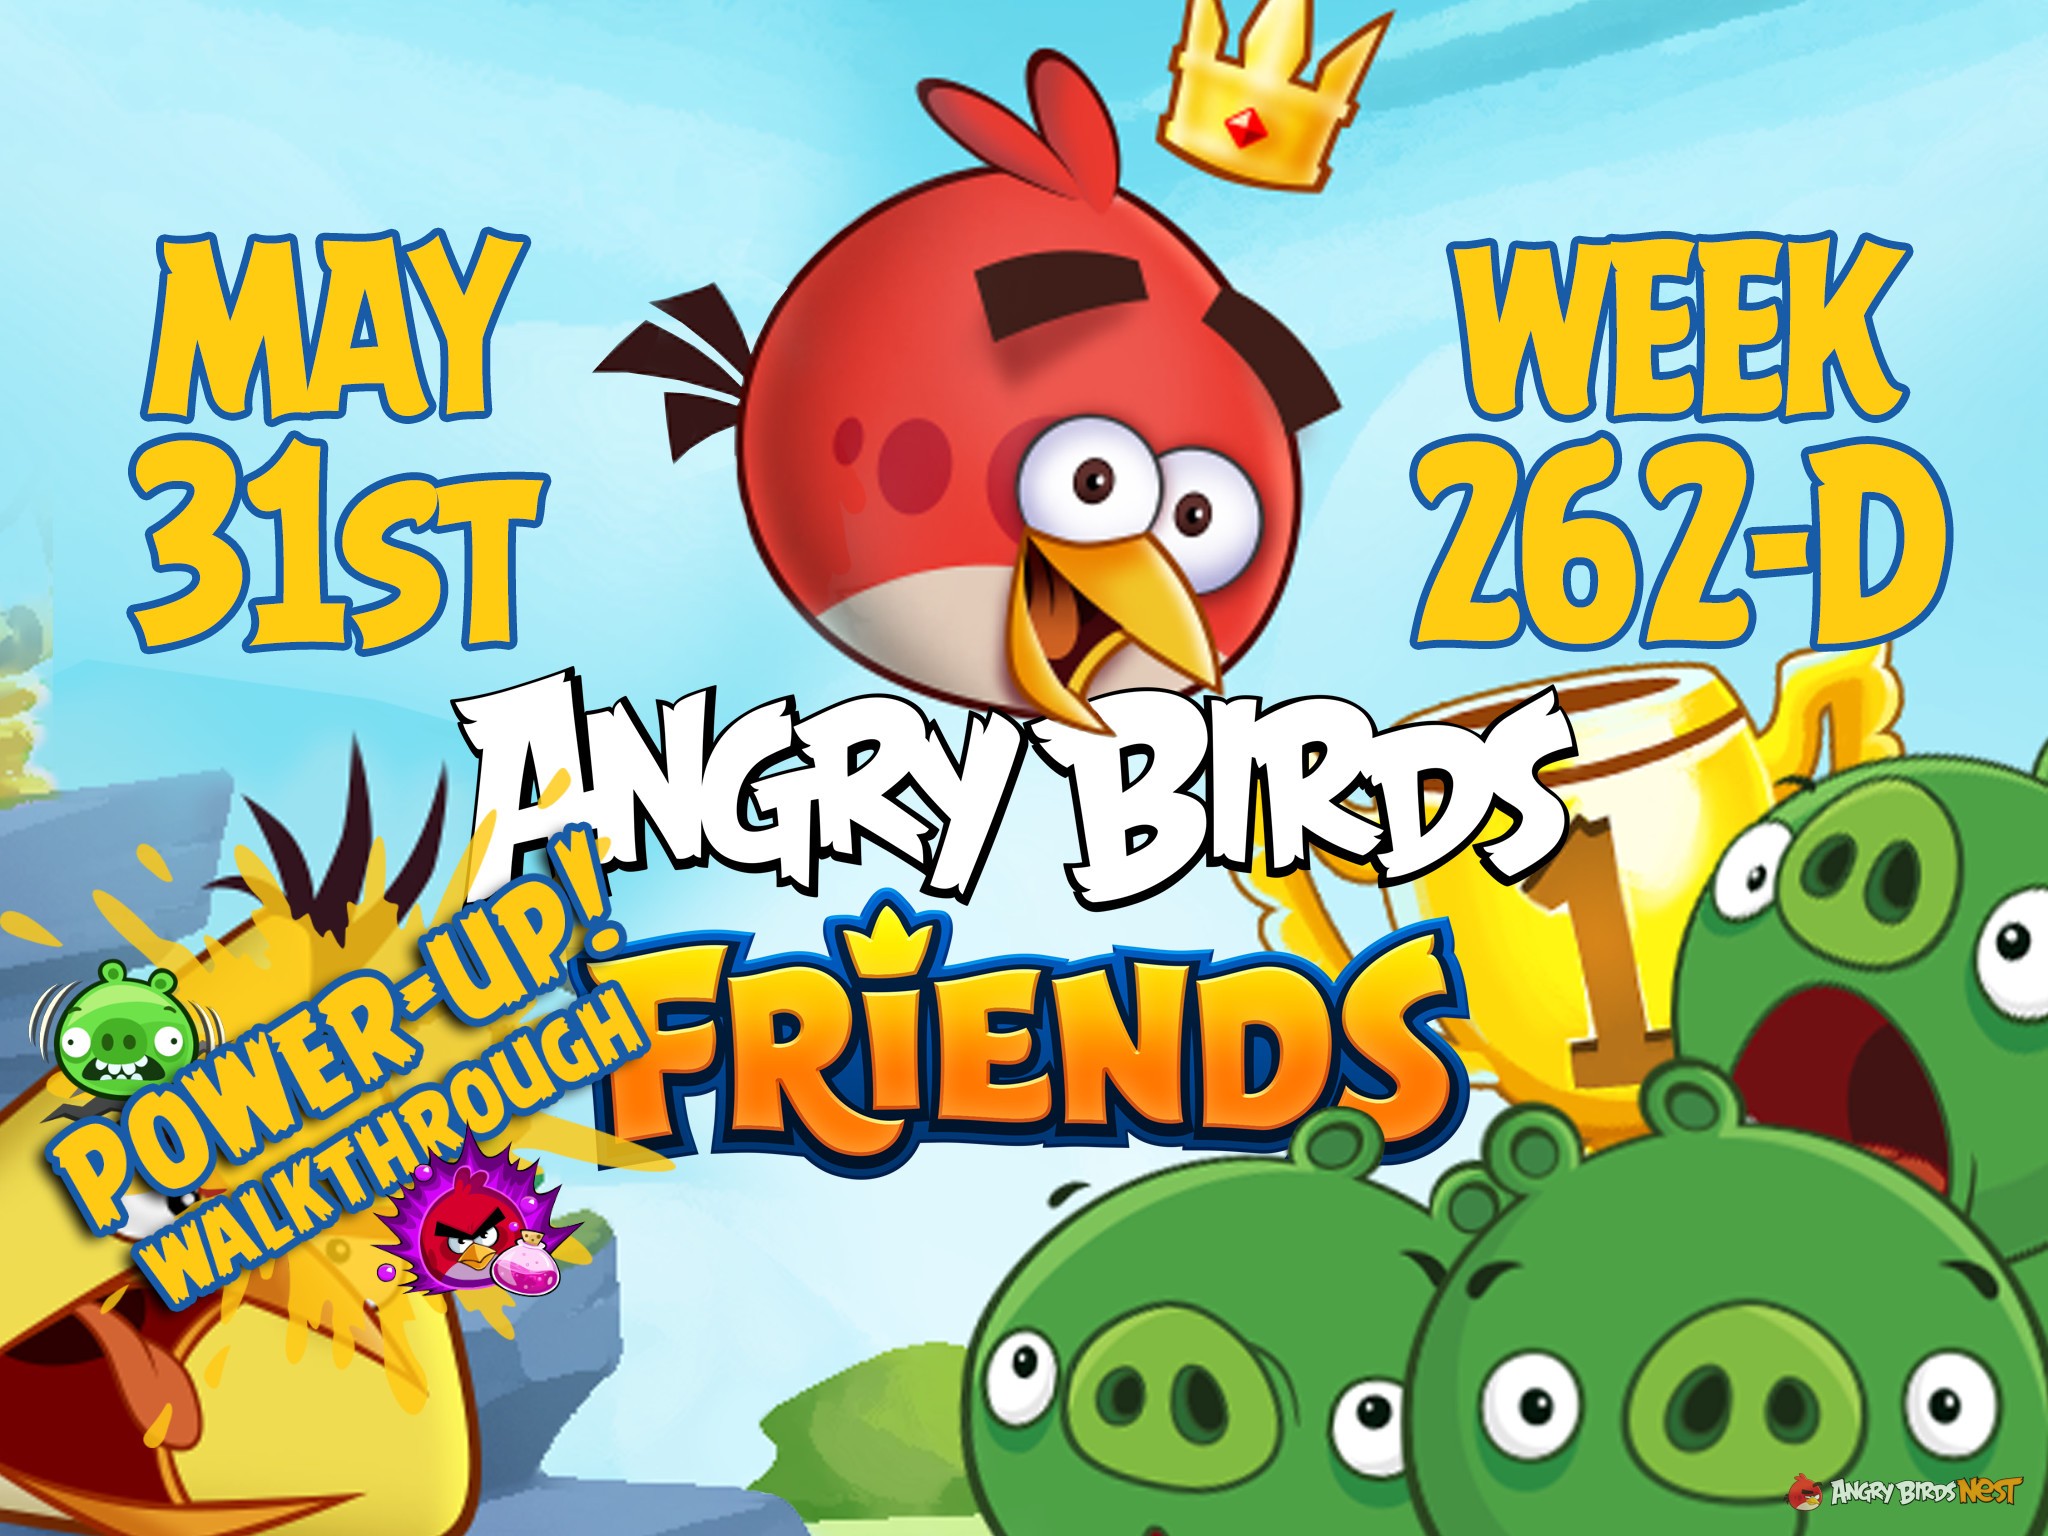 Angry Birds Friends Tournament Week 262-D Feature Image PU